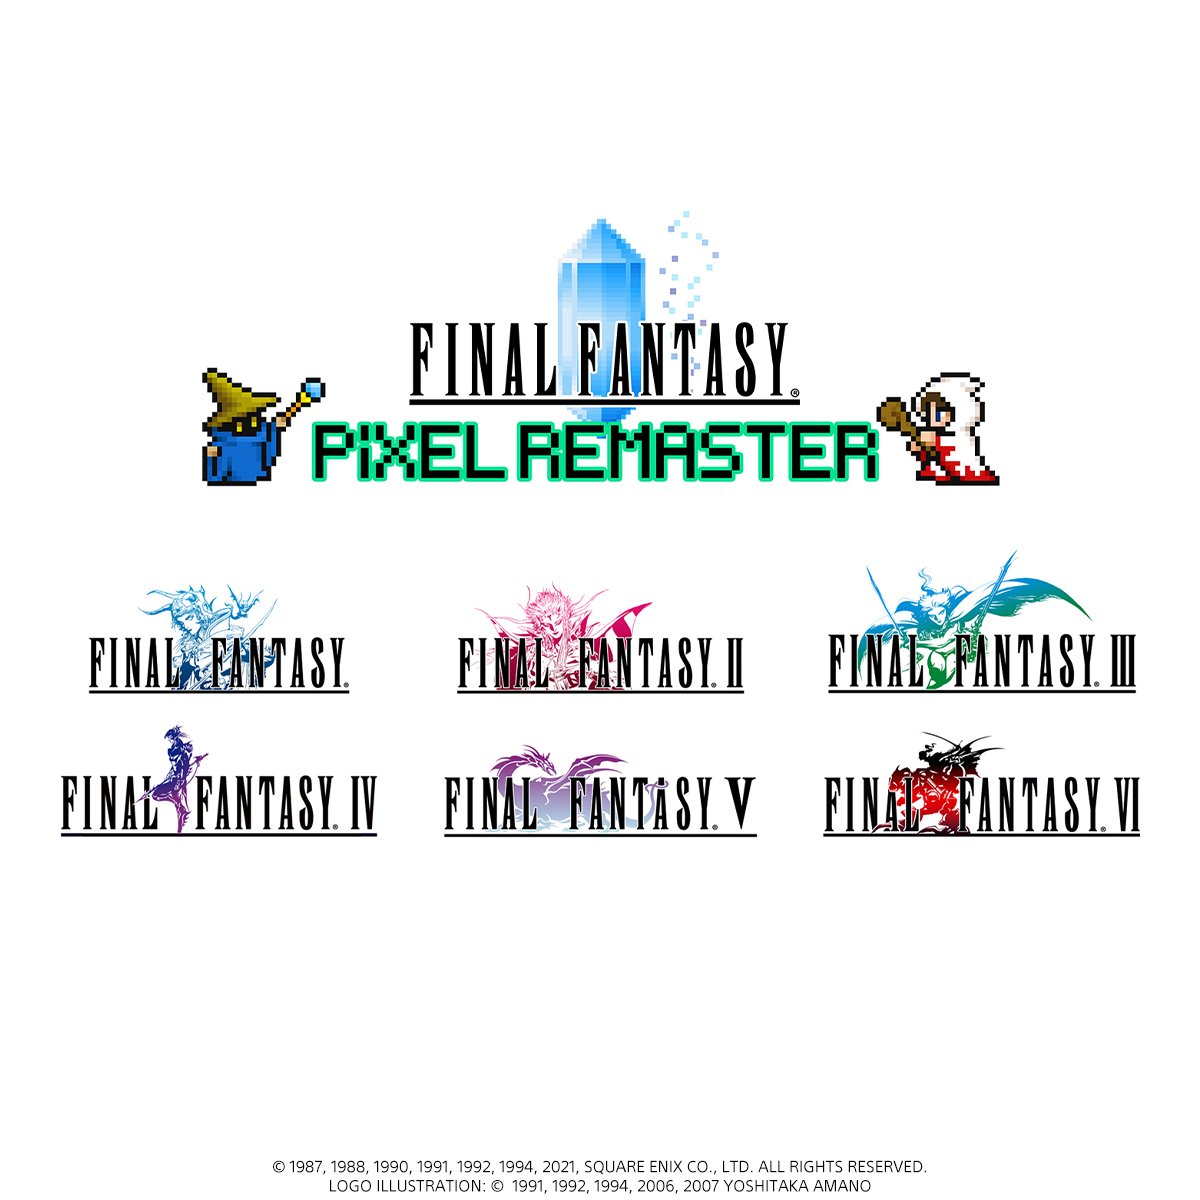 Hallelujah, the Final Fantasy Pixel Remasters launch on consoles in Spring